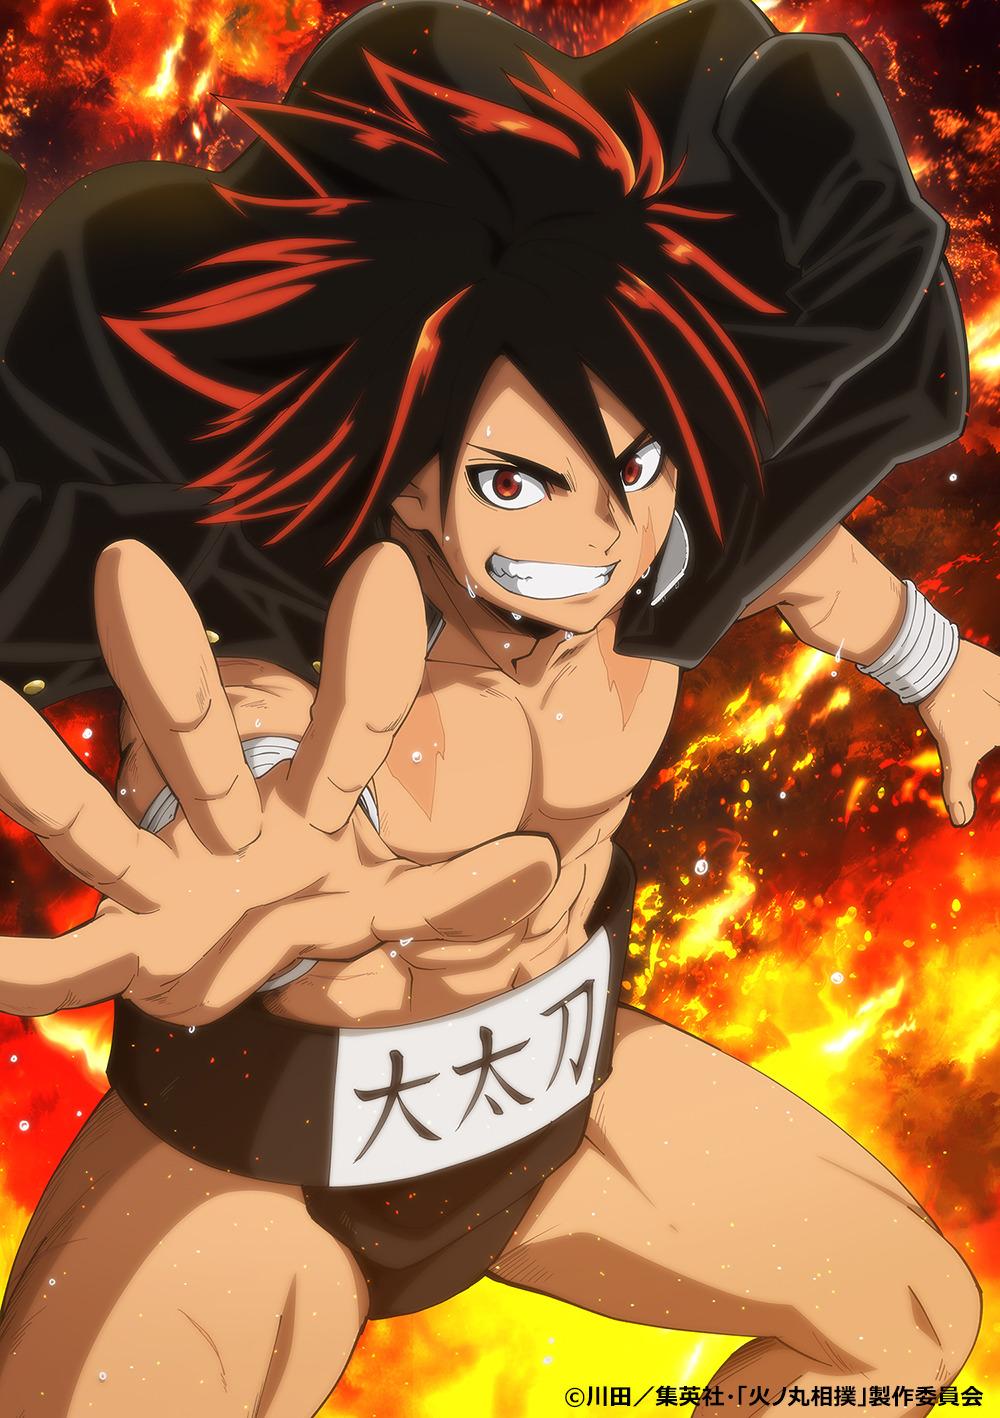 Hinomaru Sumo wallpapers HD for iPhone, Android and Desktop